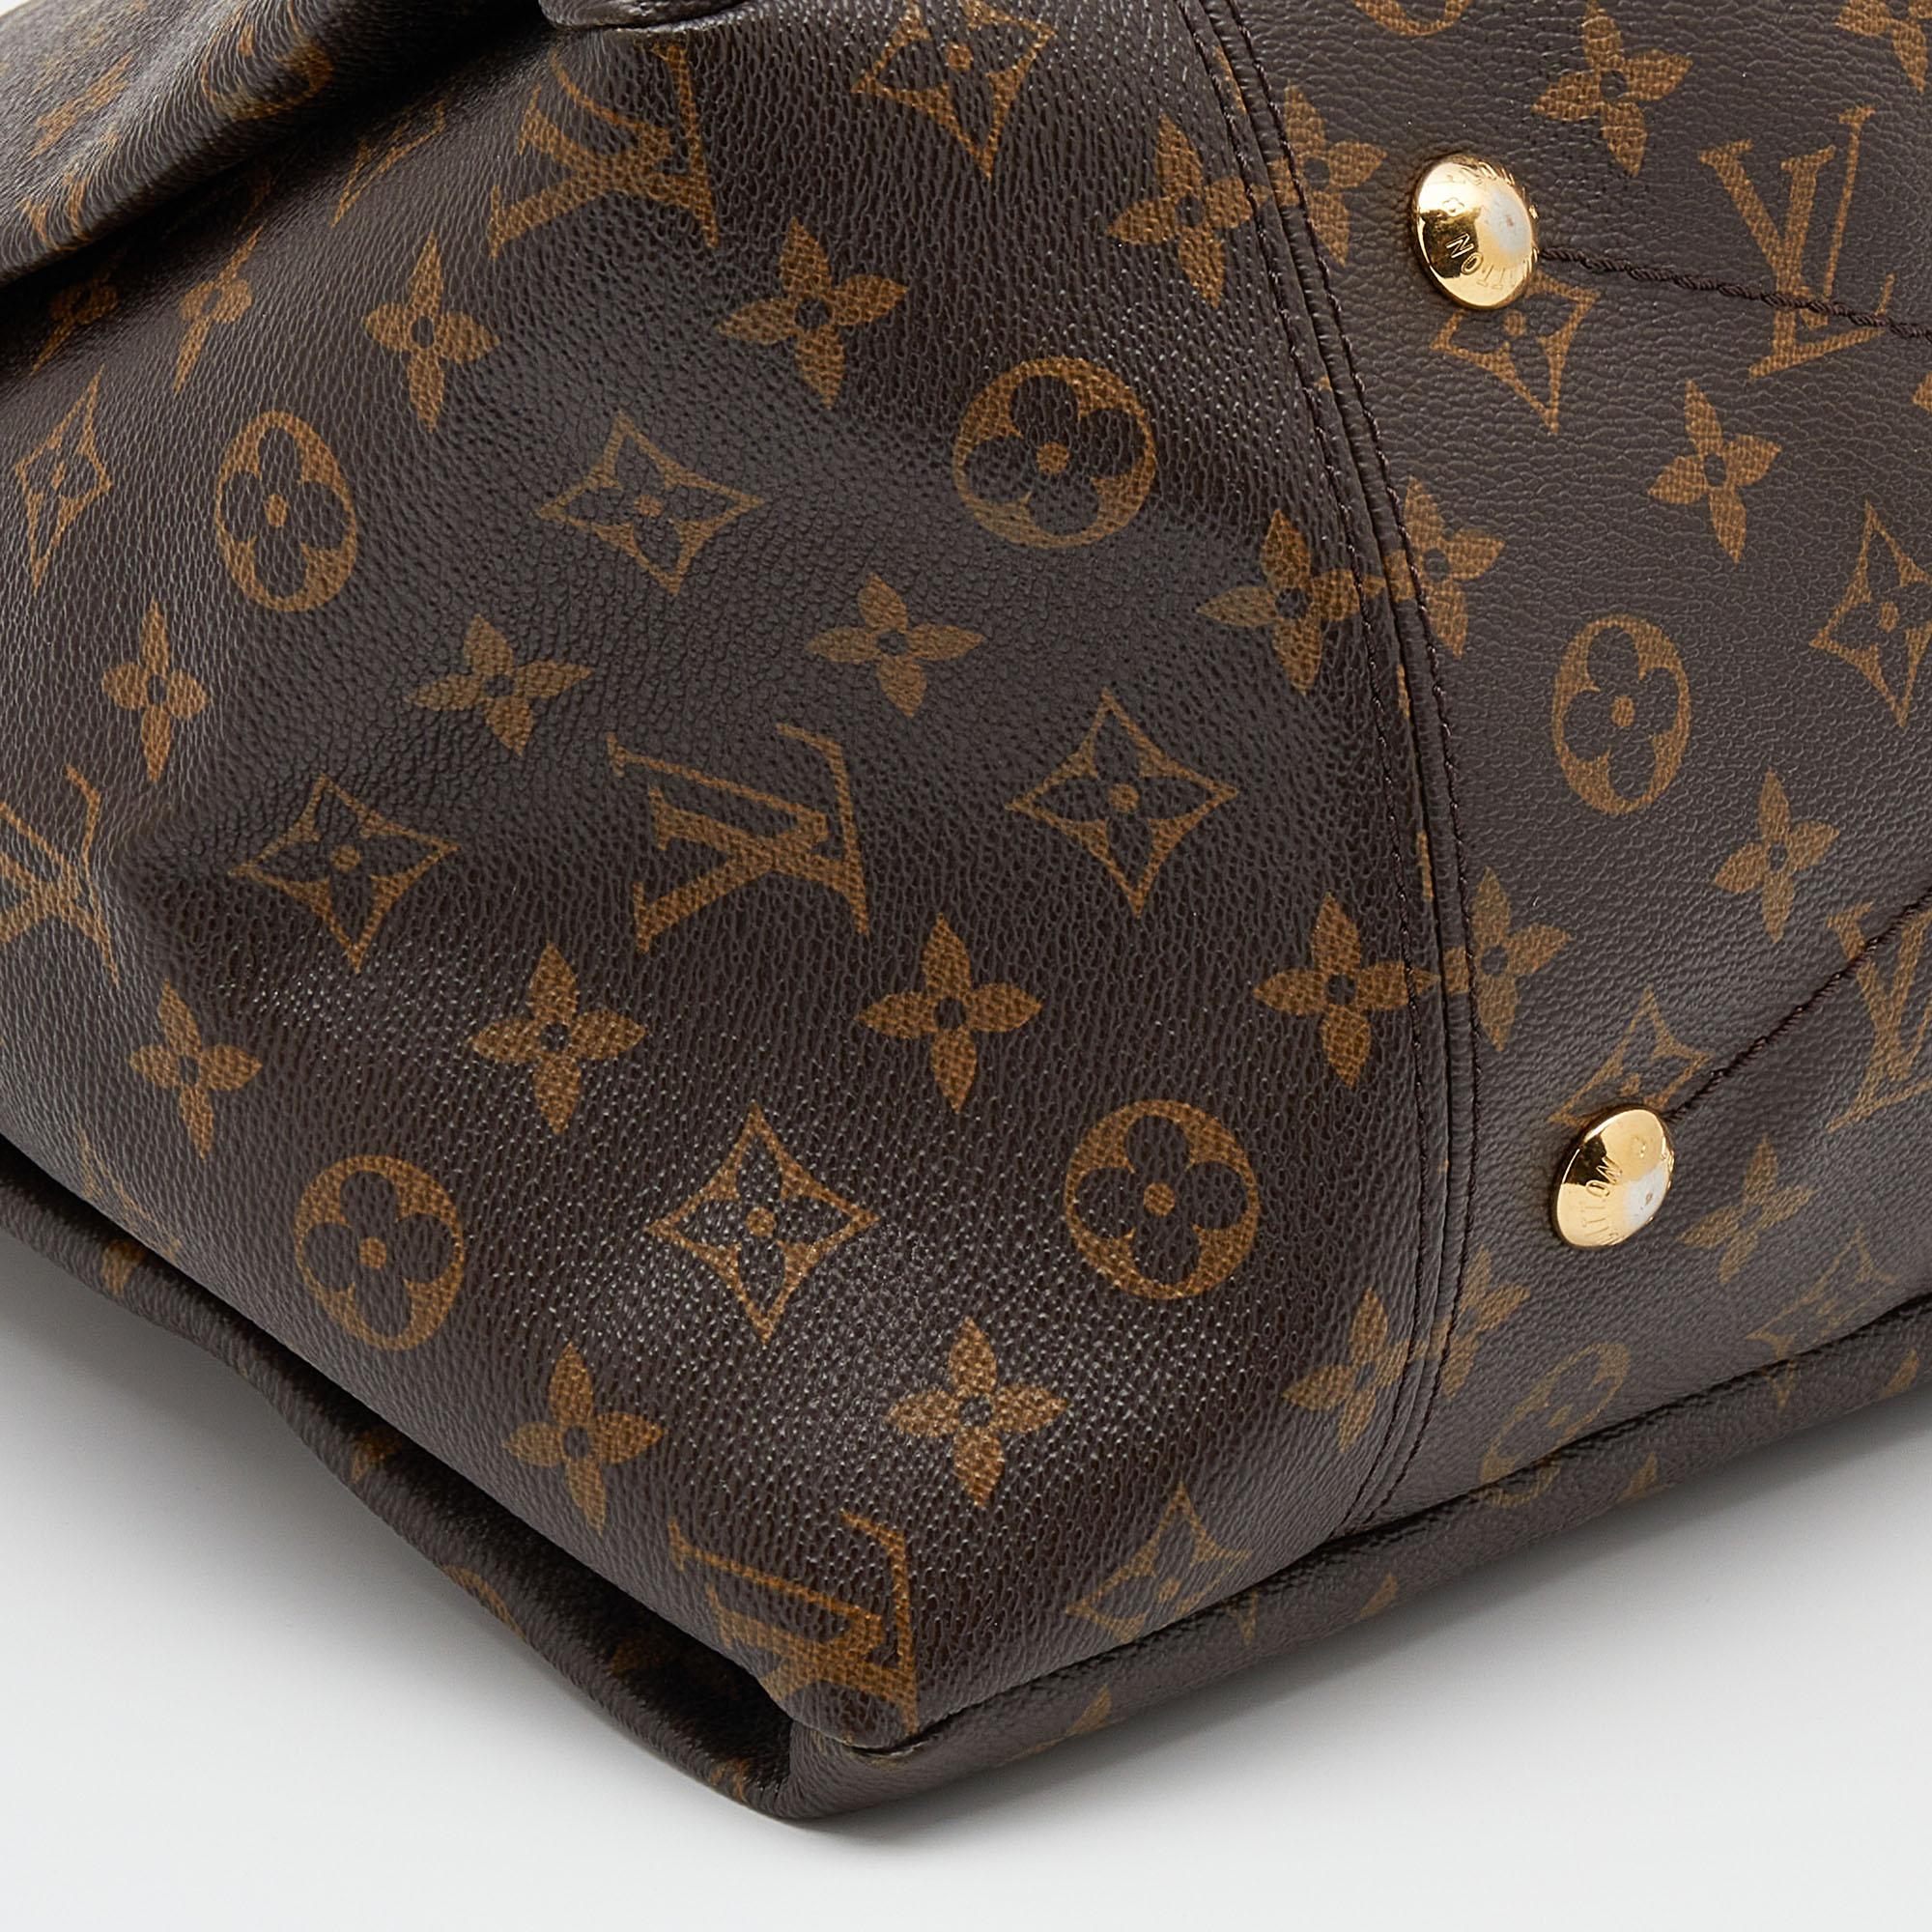 Louis Vuitton Monogram Canvas and Leather Artsy MM Bag 2